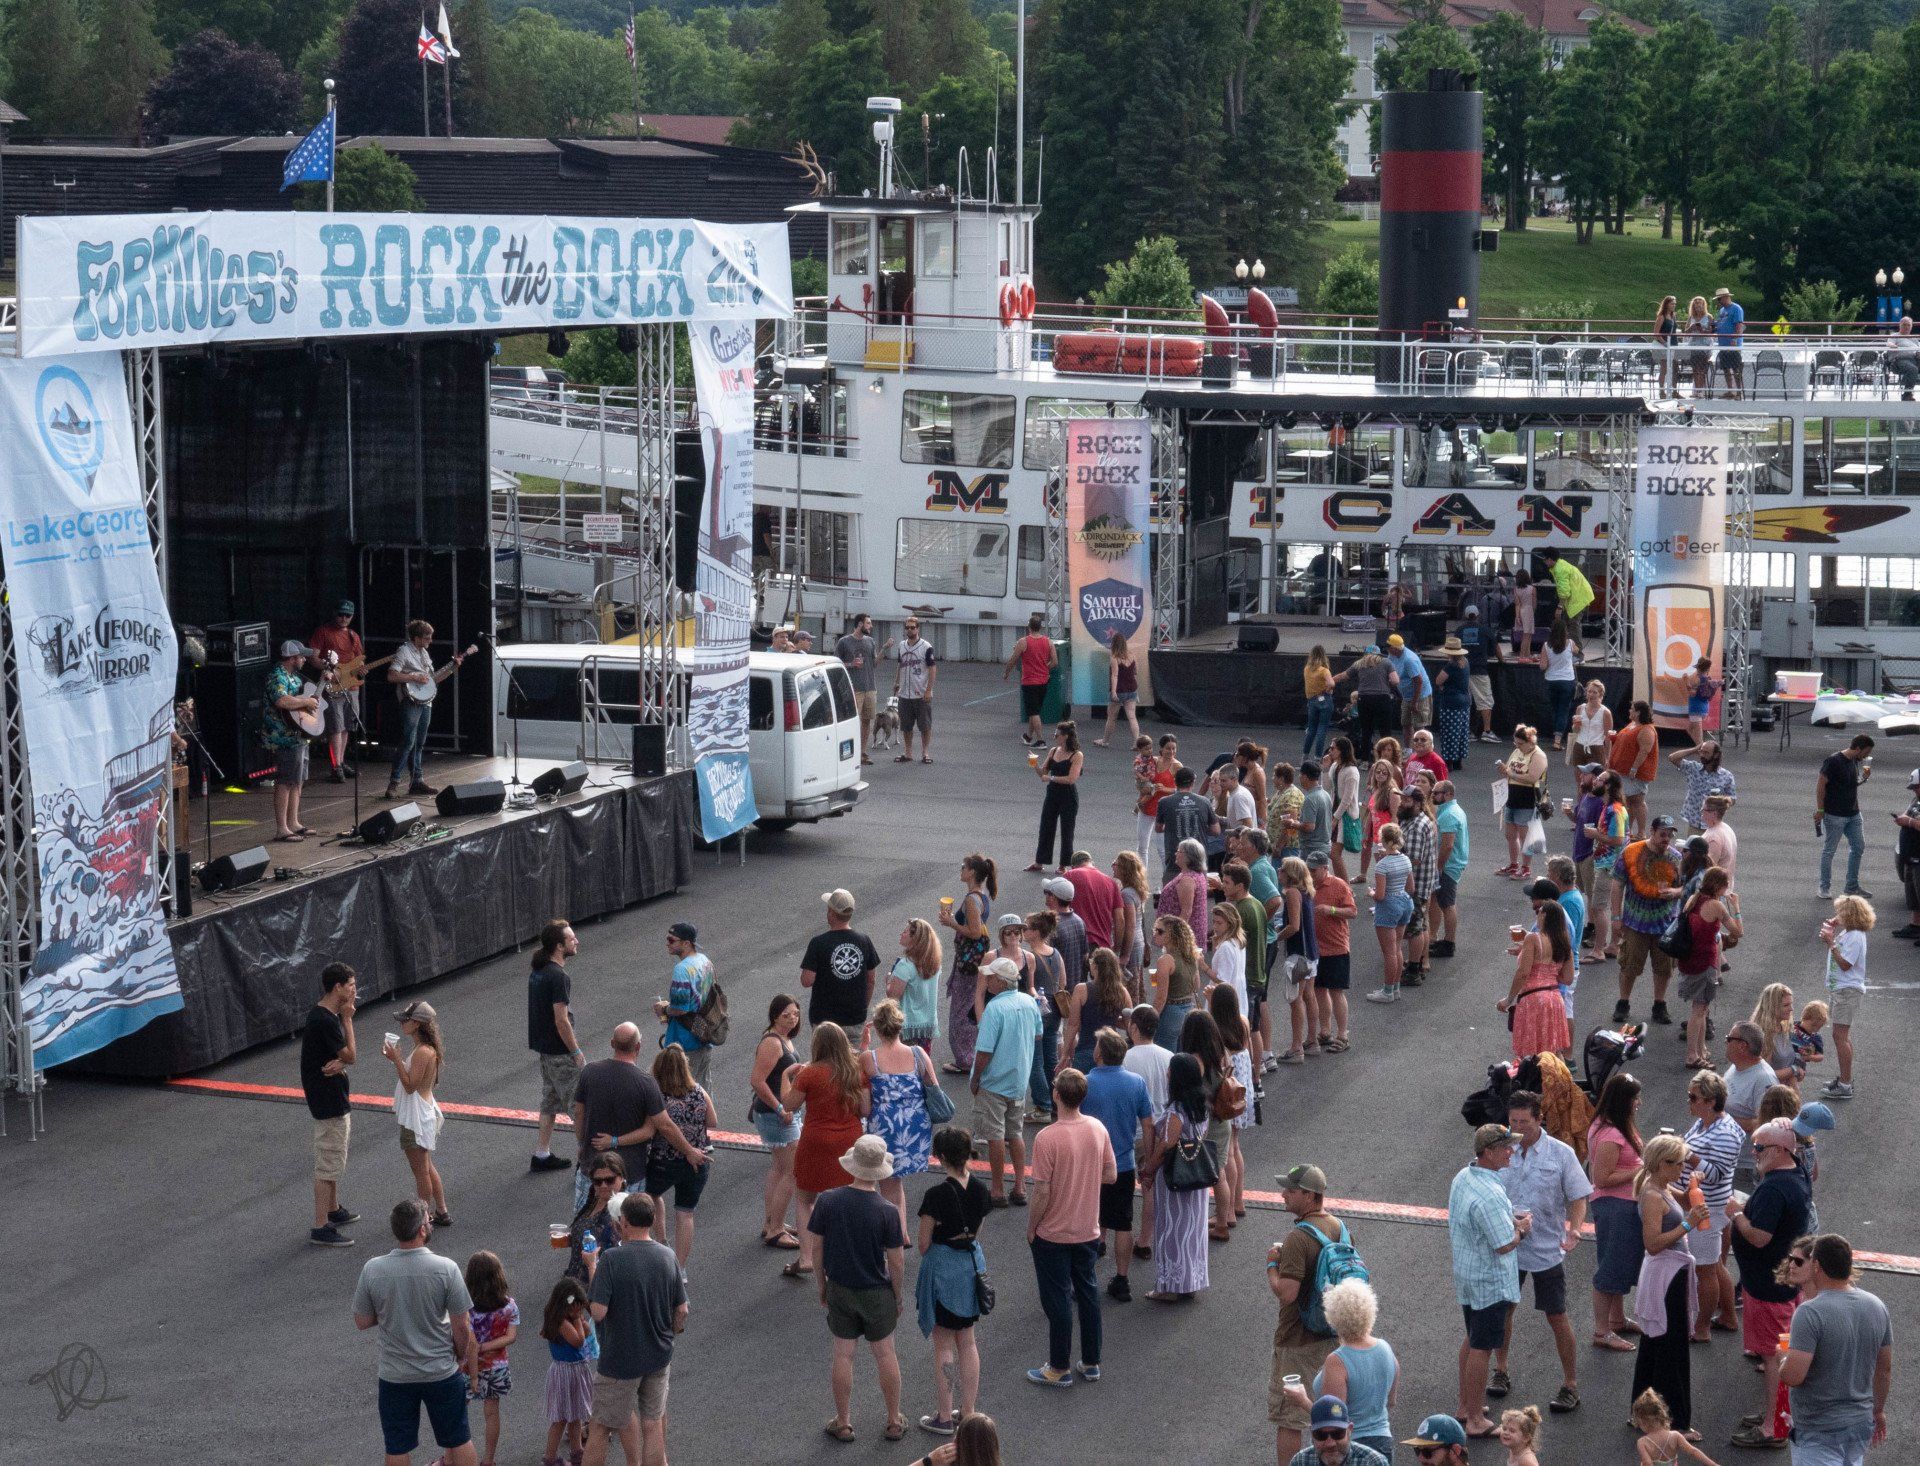 Experience Rock The Dock Lake July 22nd, 2022